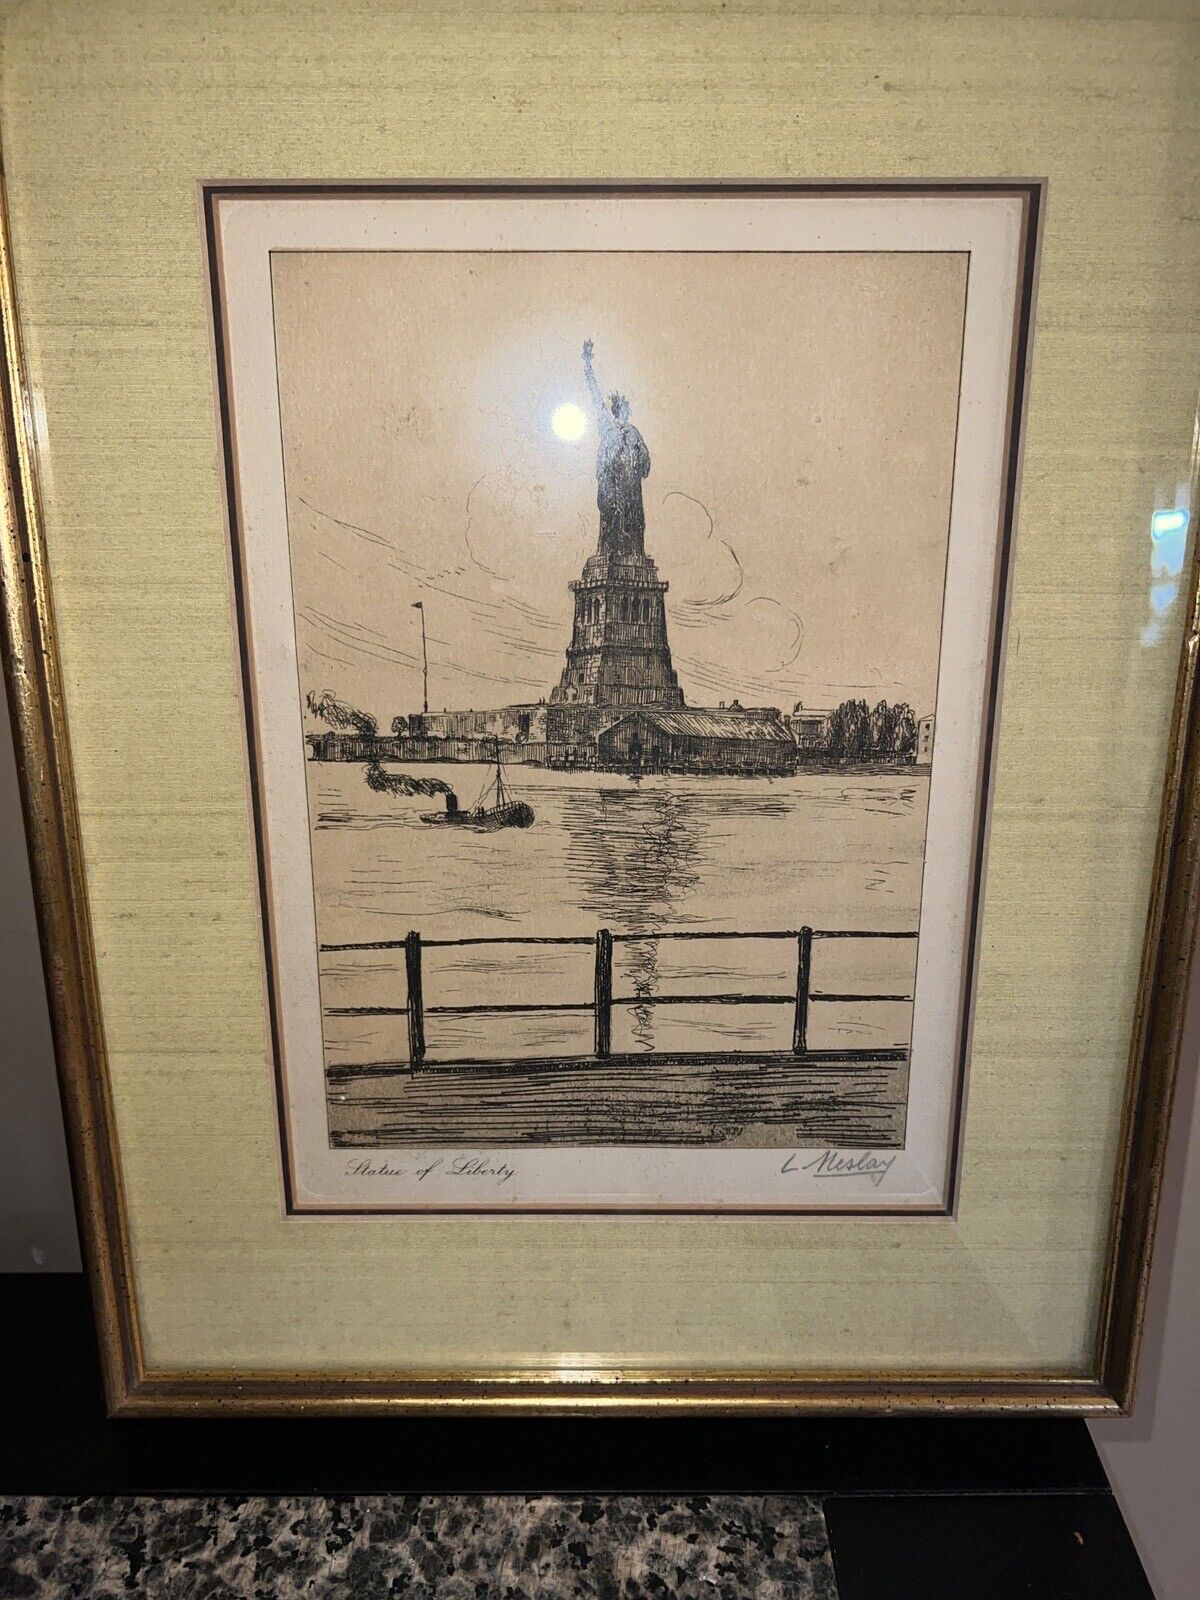 Statue of Liberty & Harbor Scene Signed L. Meslay Ink On Paper Matted Framed